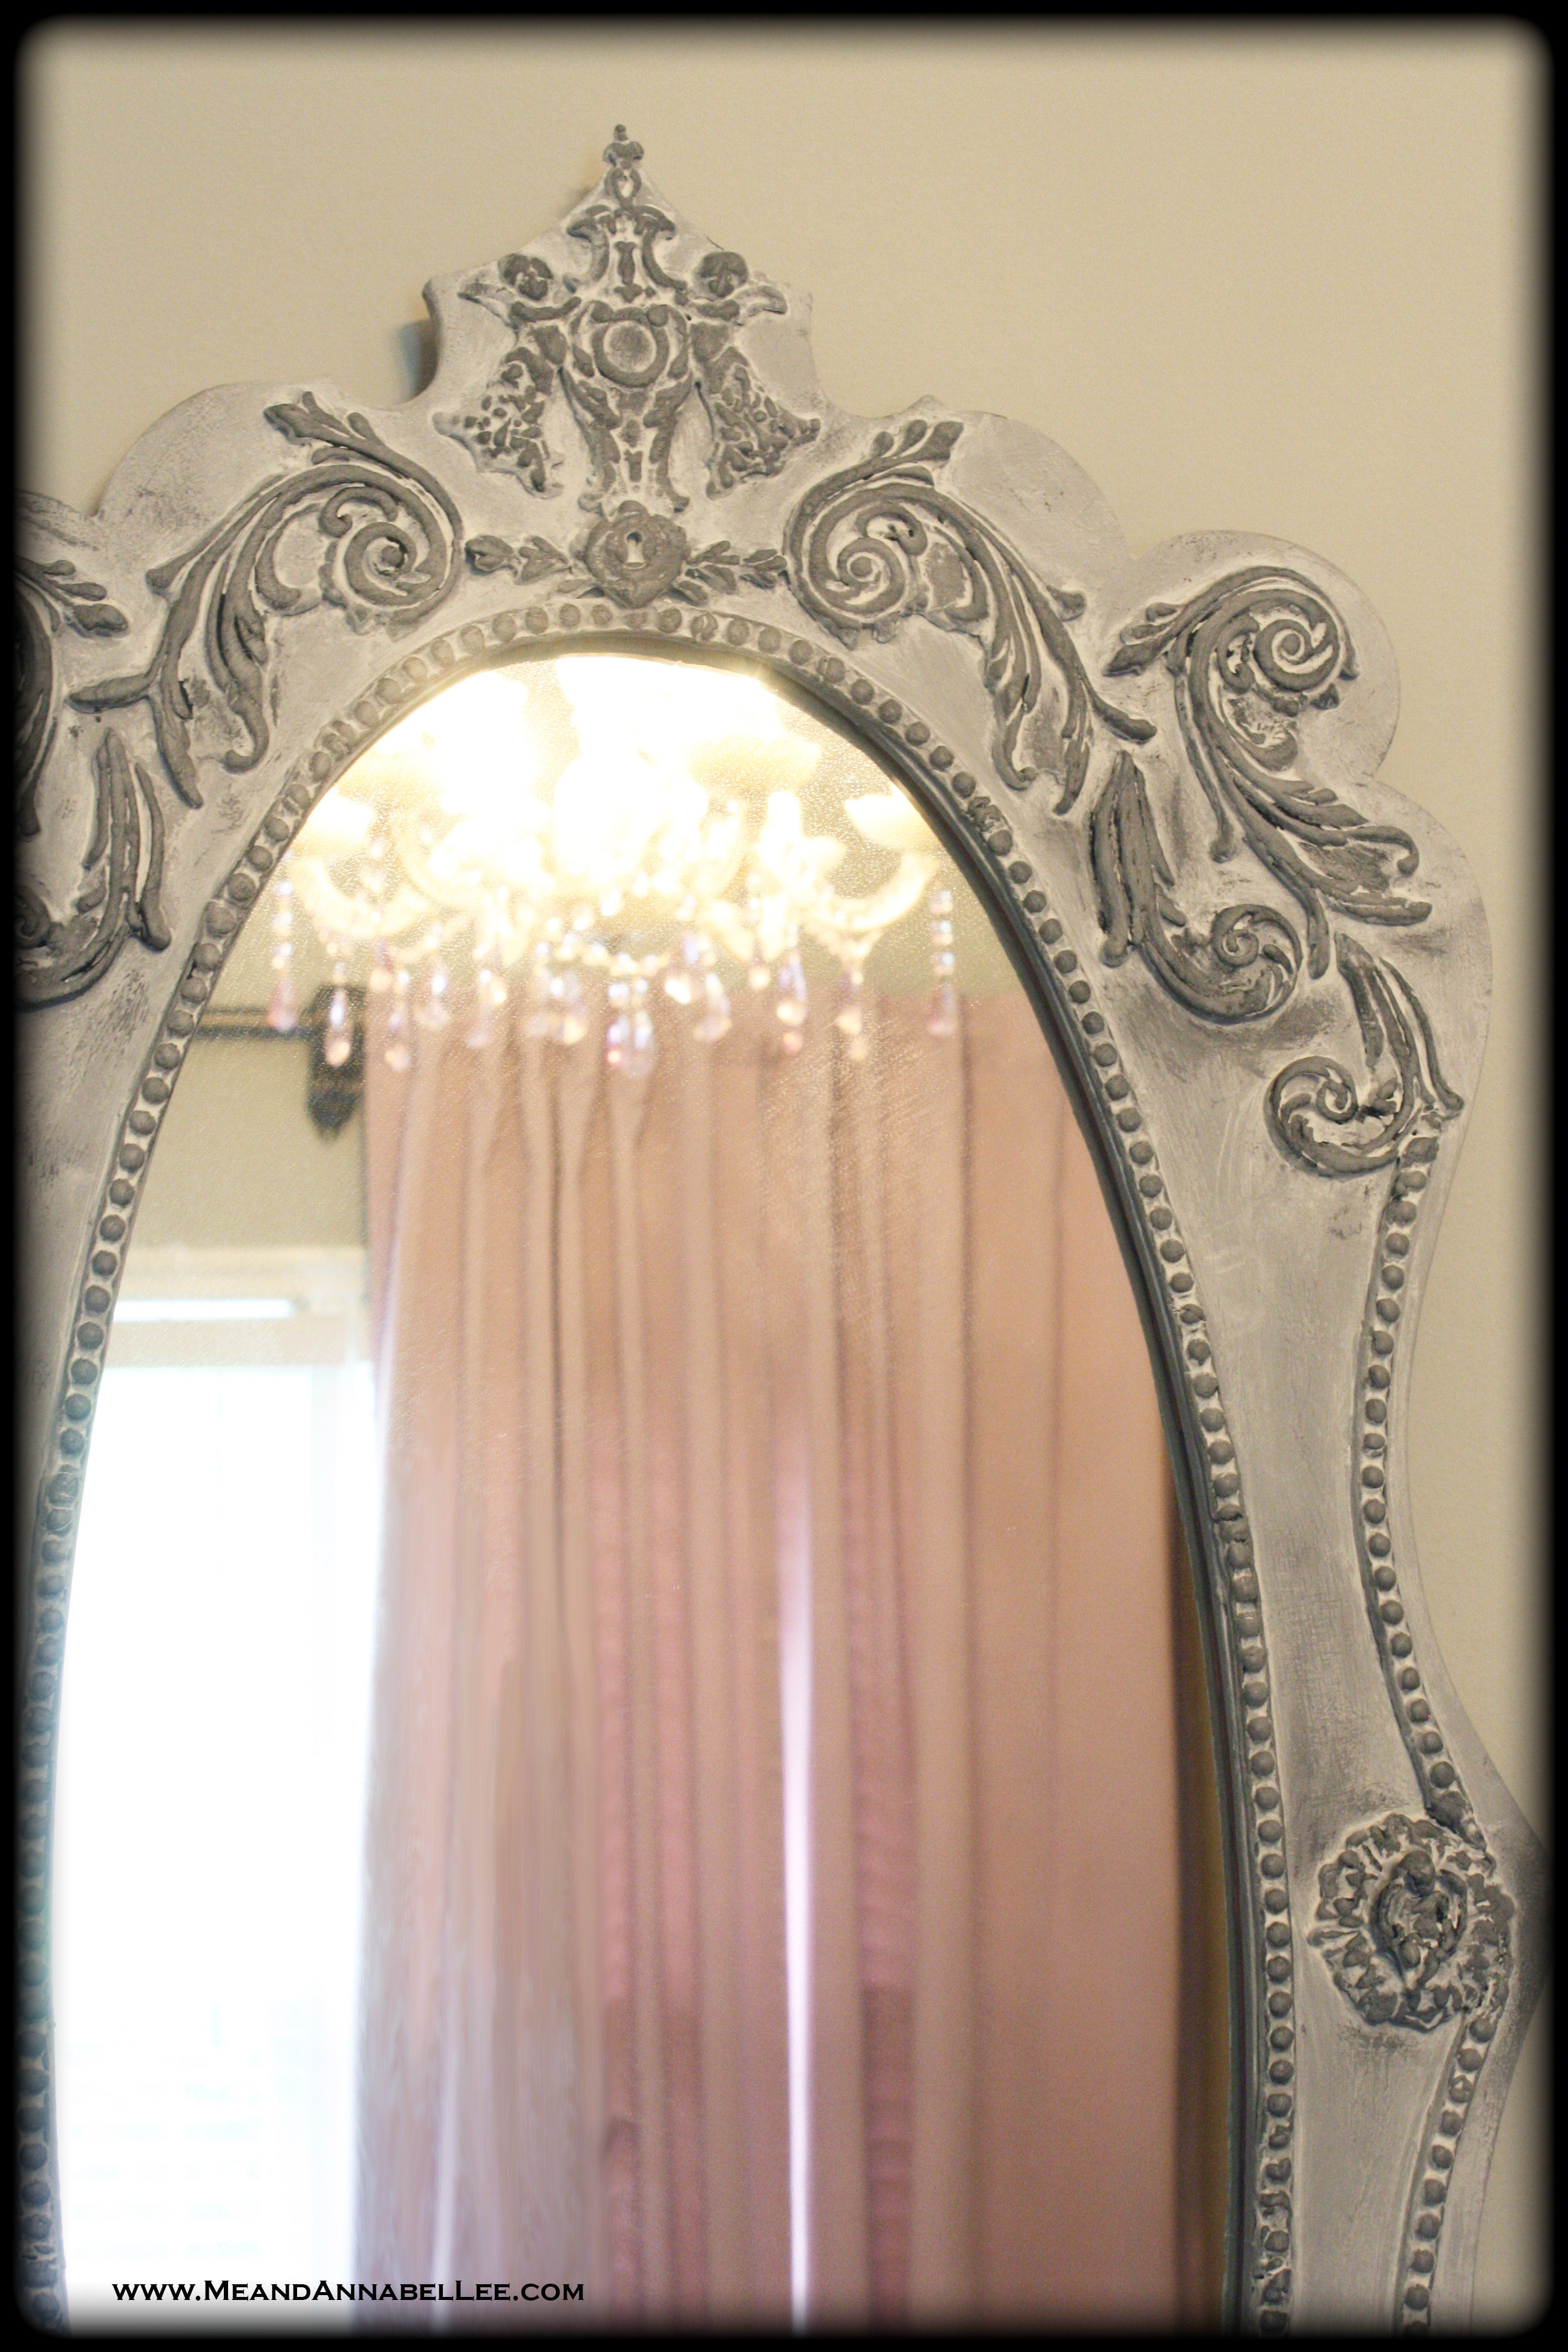 DIY Baroque Mirror in a Weathered Stone Grey Antique Finish | Faux Stone | Distress and Antique a Frame | Clay Casting | Faux Paint | Little Girl's Pink & Grey Bedroom | www.MeandAnnabelLee.com